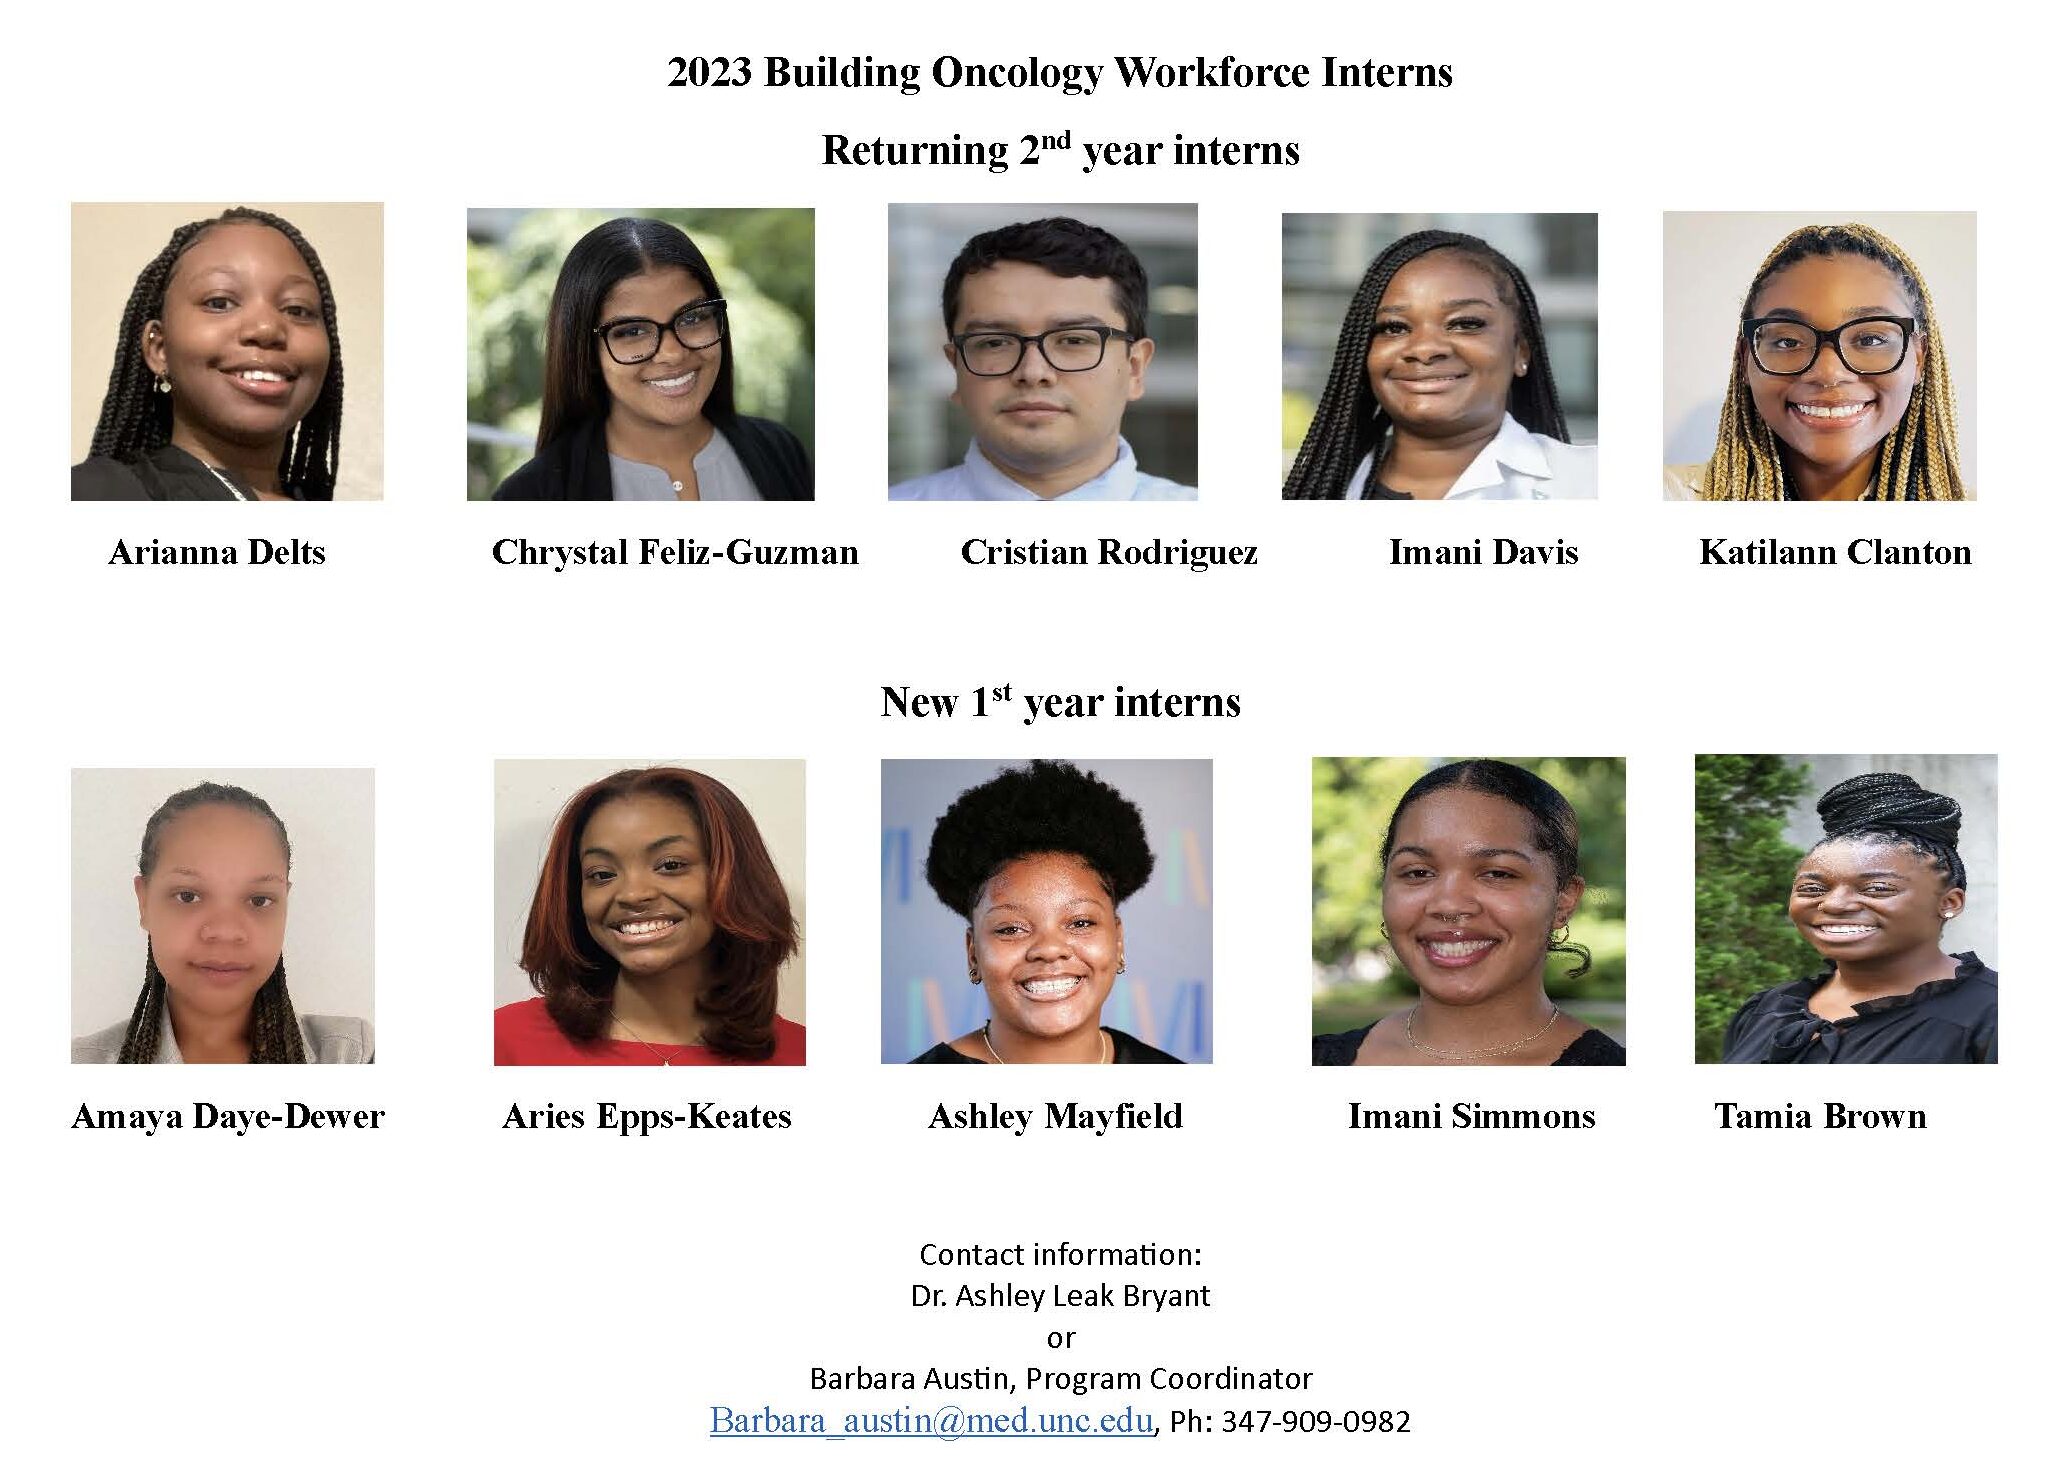 The 2023 Building Oncology Workforce interns include, from the returning second year intern group: Arianna Delts, Chrystal Feliz-Guzman, Cristian Rodriguez, Imani Davis, and Katilann Clanton. The first year intern group includes: Amaya Daye-Dewer, Aries Epps-Keates, Ashley Mayfield, Imani Simmons, and Tamia Brown.